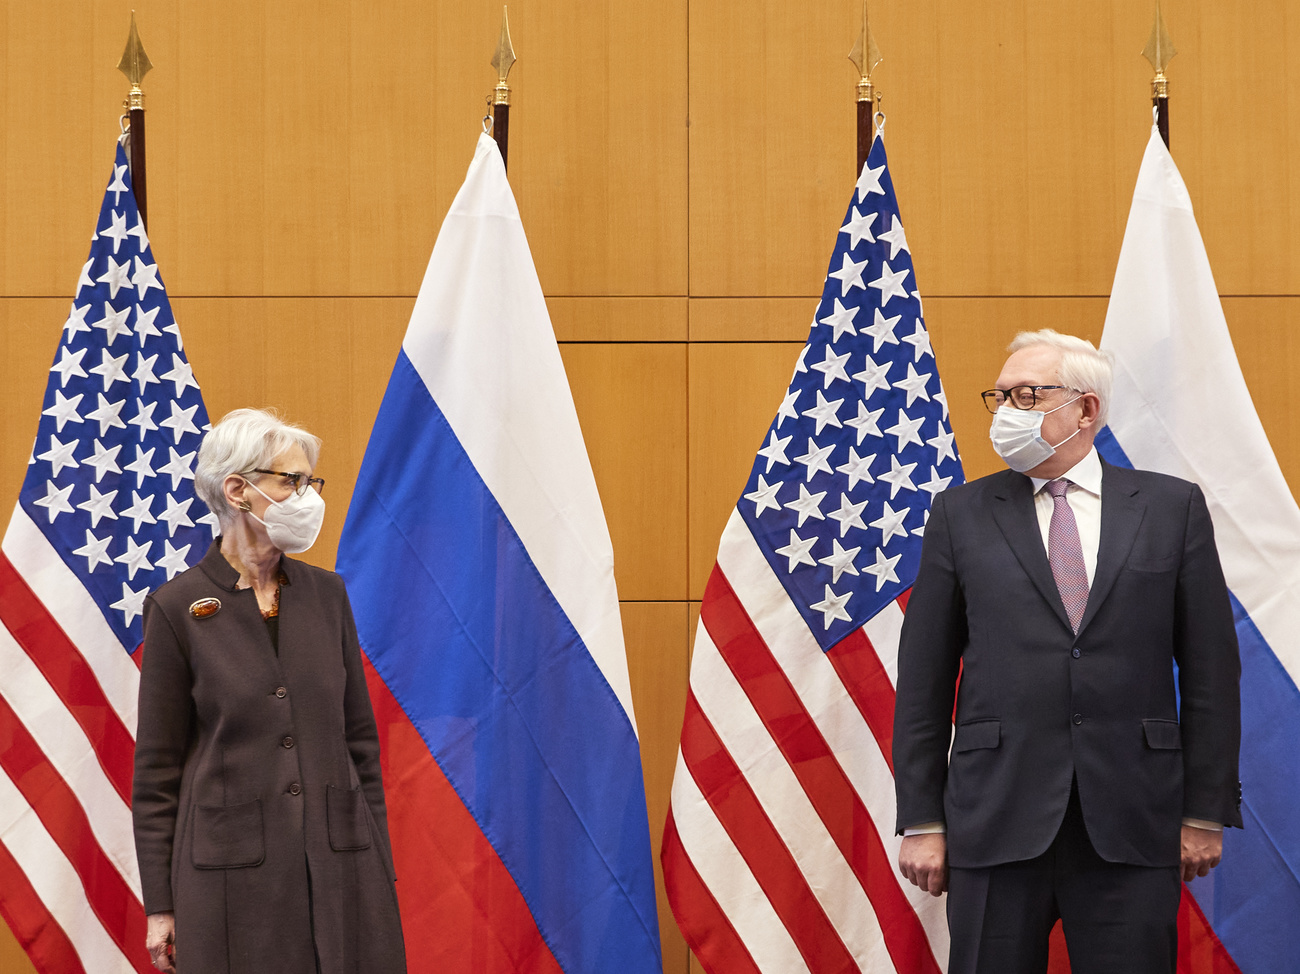 Deputy US Secretary of State Wendy Sherman and Russian Deputy Foreign Minister Sergei Ryabkov in front of US and Russian flags